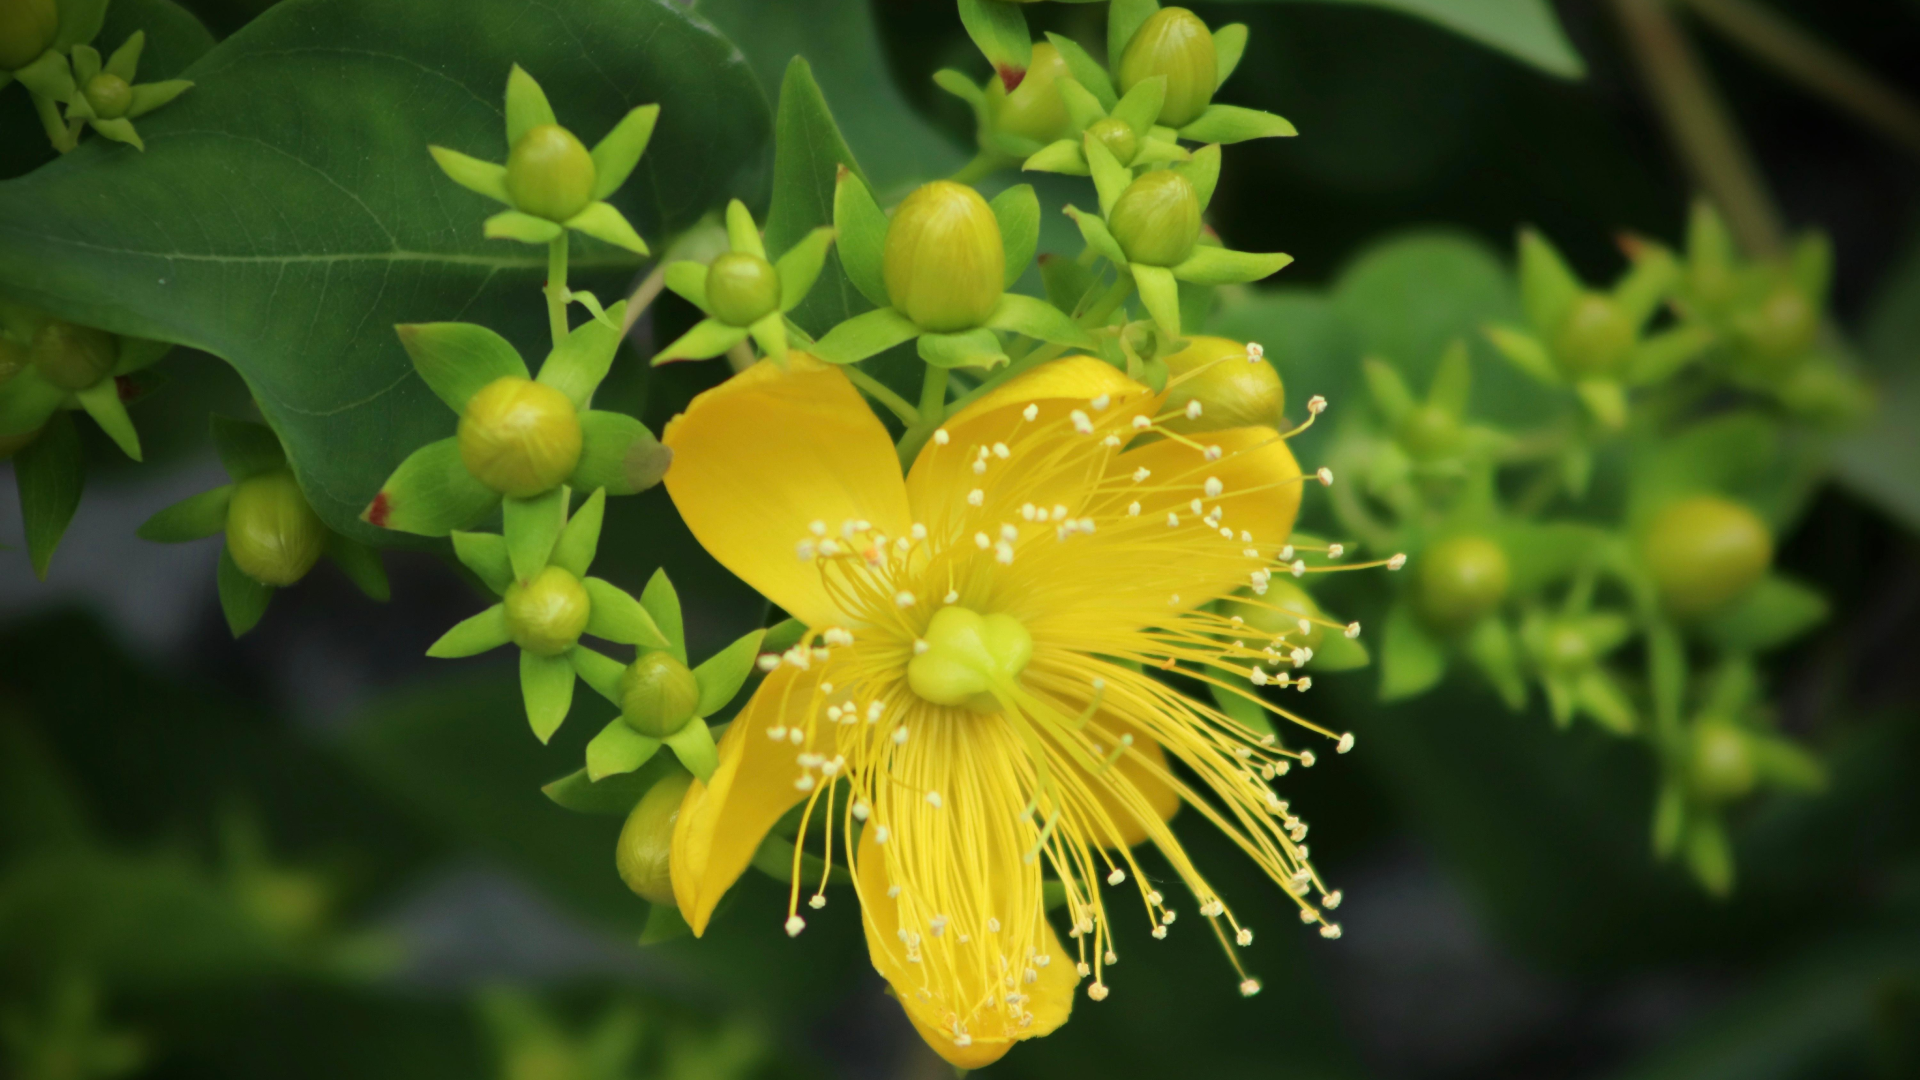 St. John's Wort and Its Hypericin Ingredients show a Potent Antiviral Activity against SARS-CoV-2